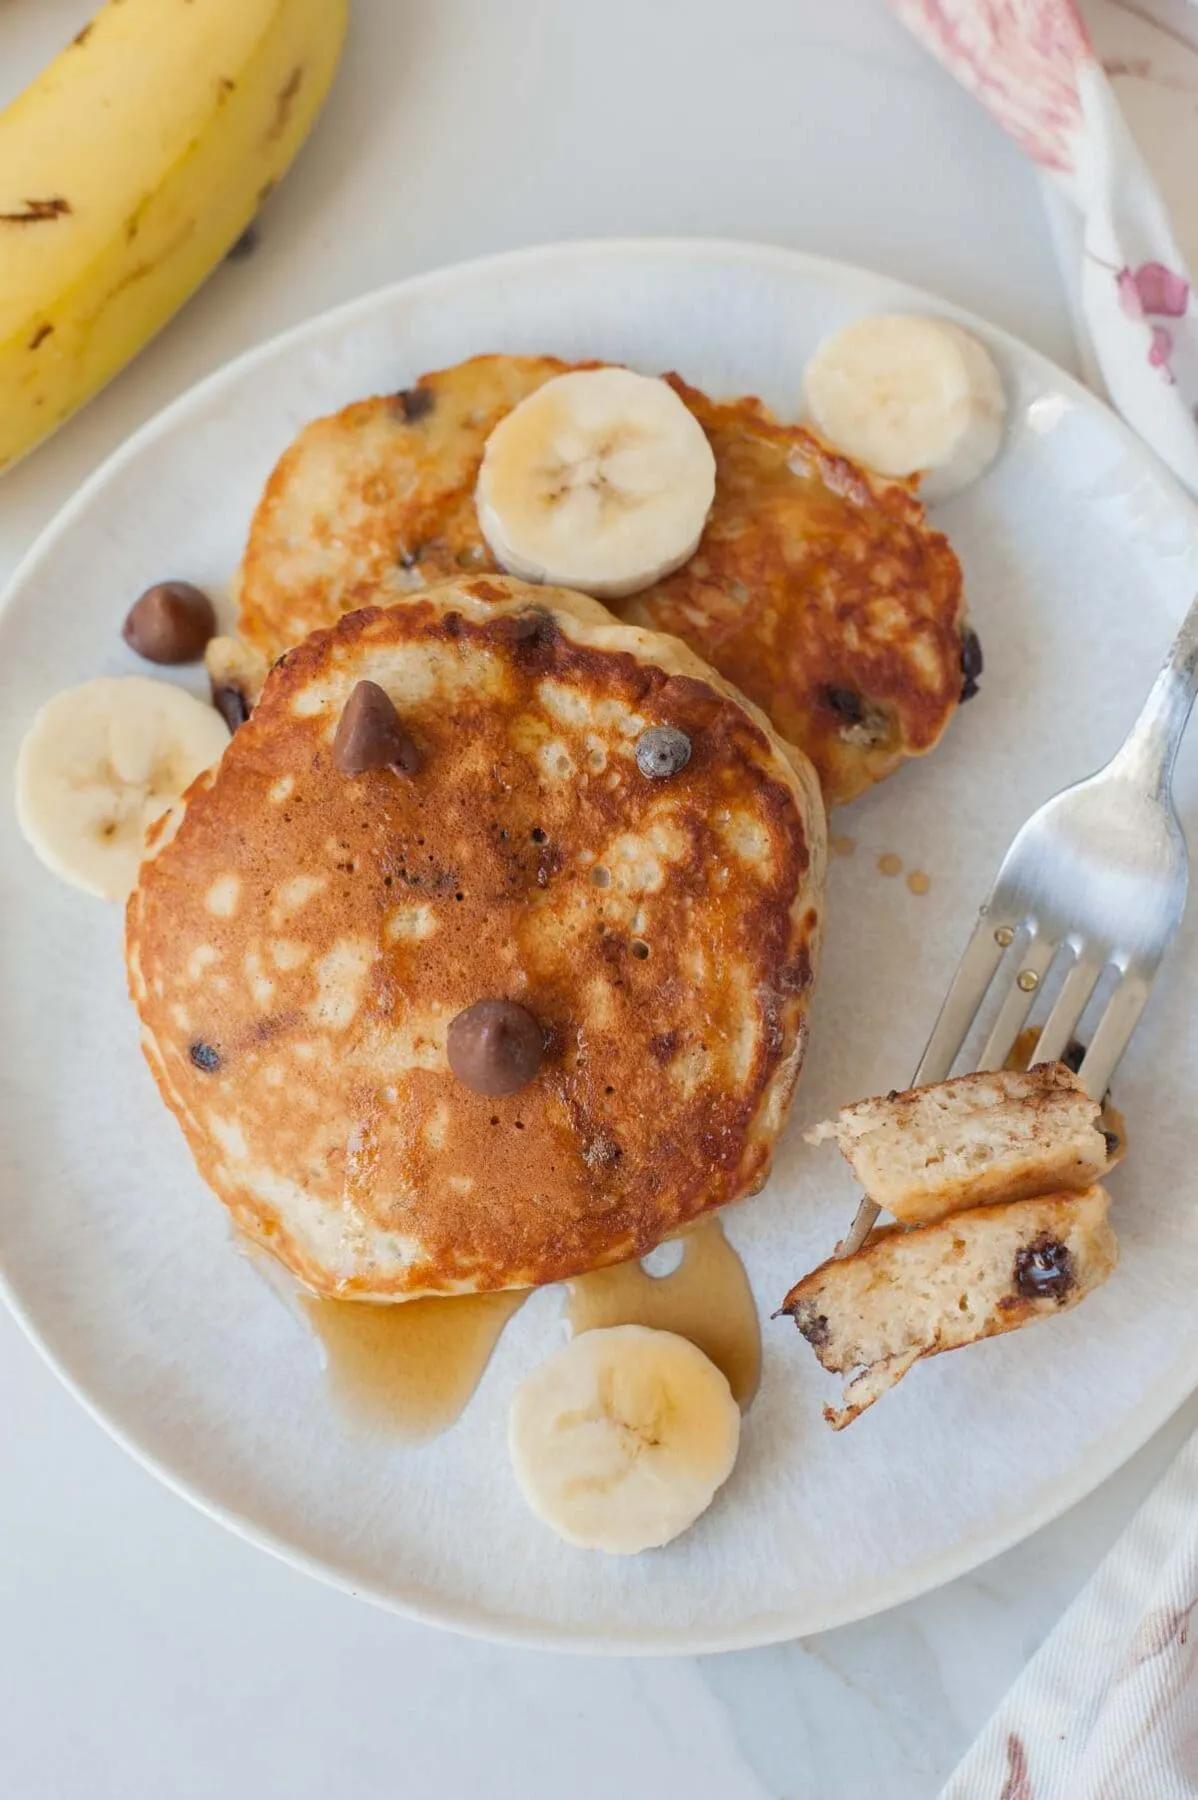 Banana Chocolate Chip Pancakes (VIDEO) - Everyday Delicious